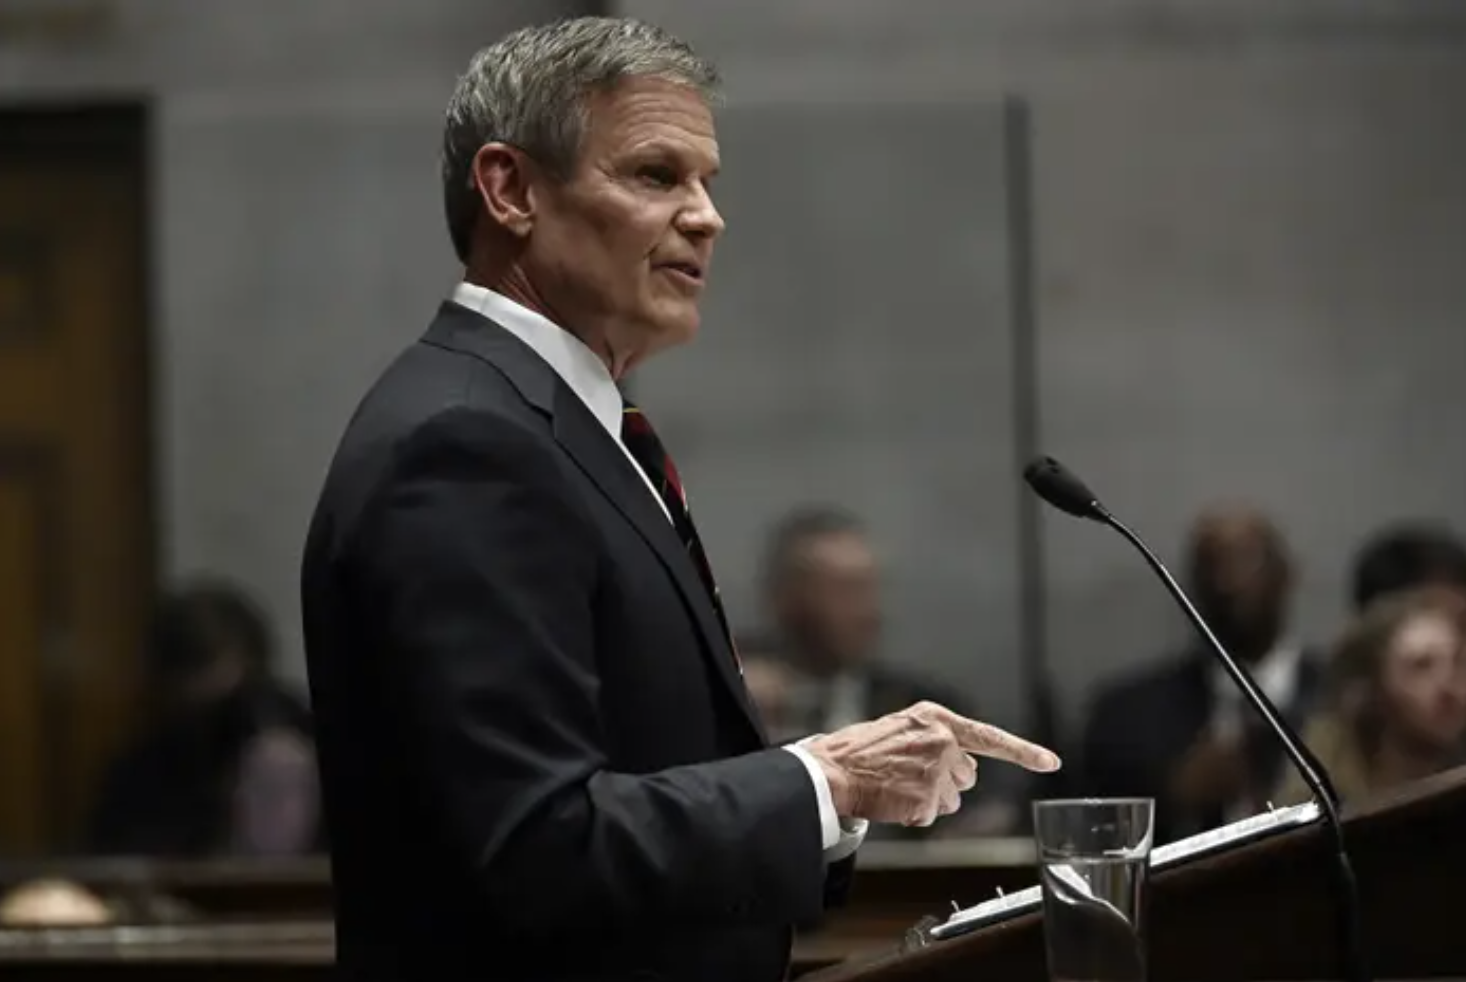 Tennessee Gov. Bill Lee in a suit in front of a podium